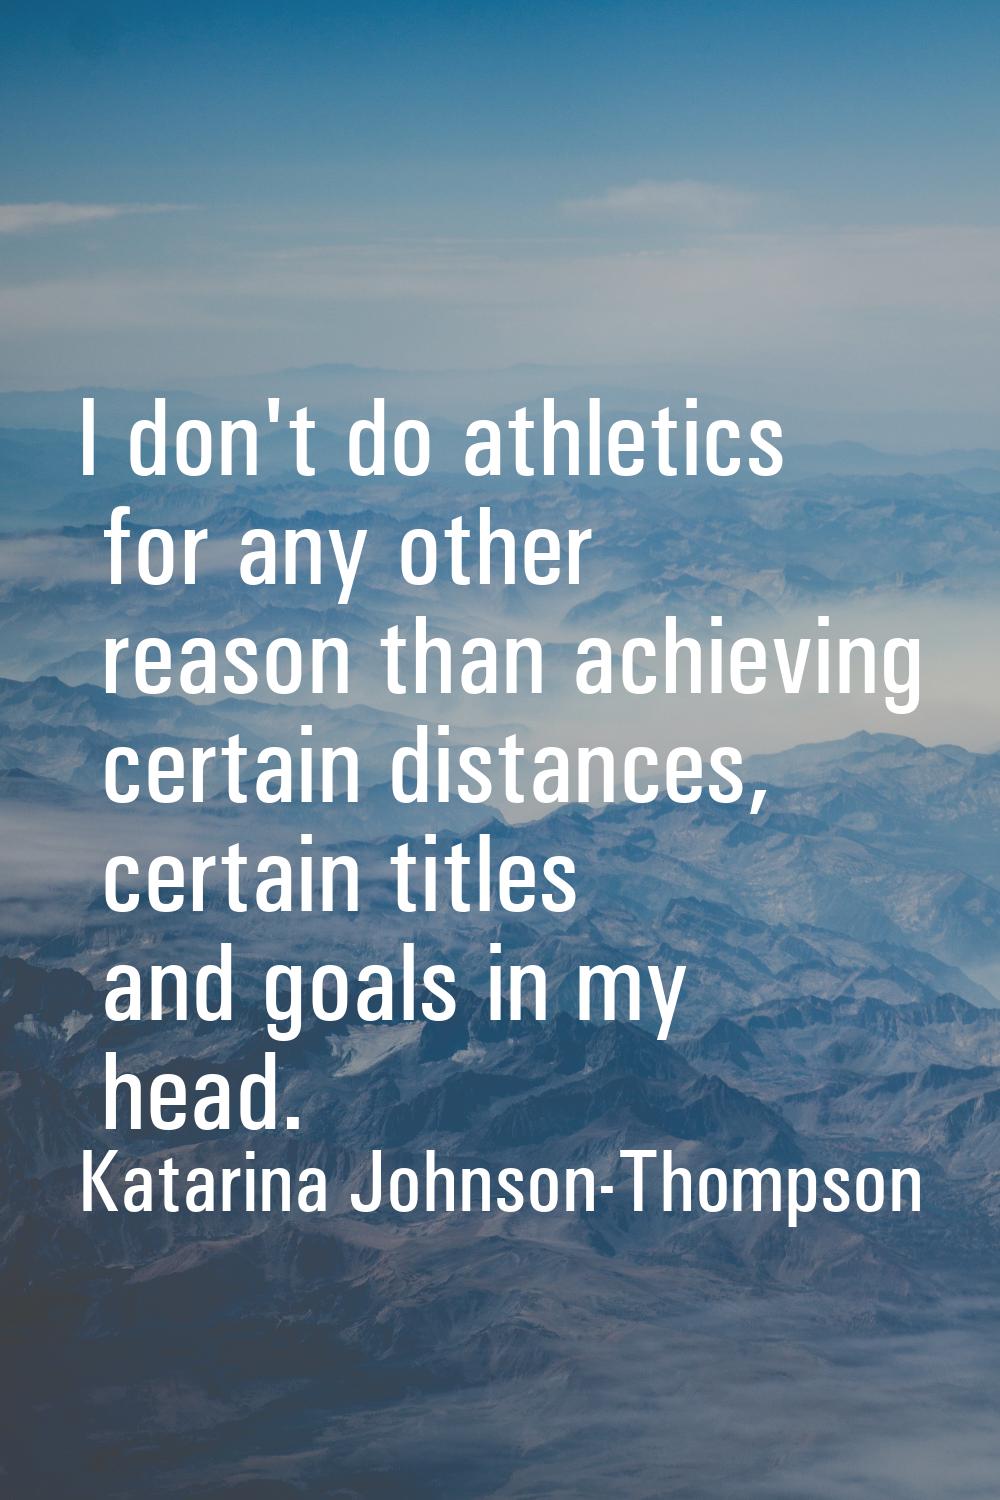 I don't do athletics for any other reason than achieving certain distances, certain titles and goal